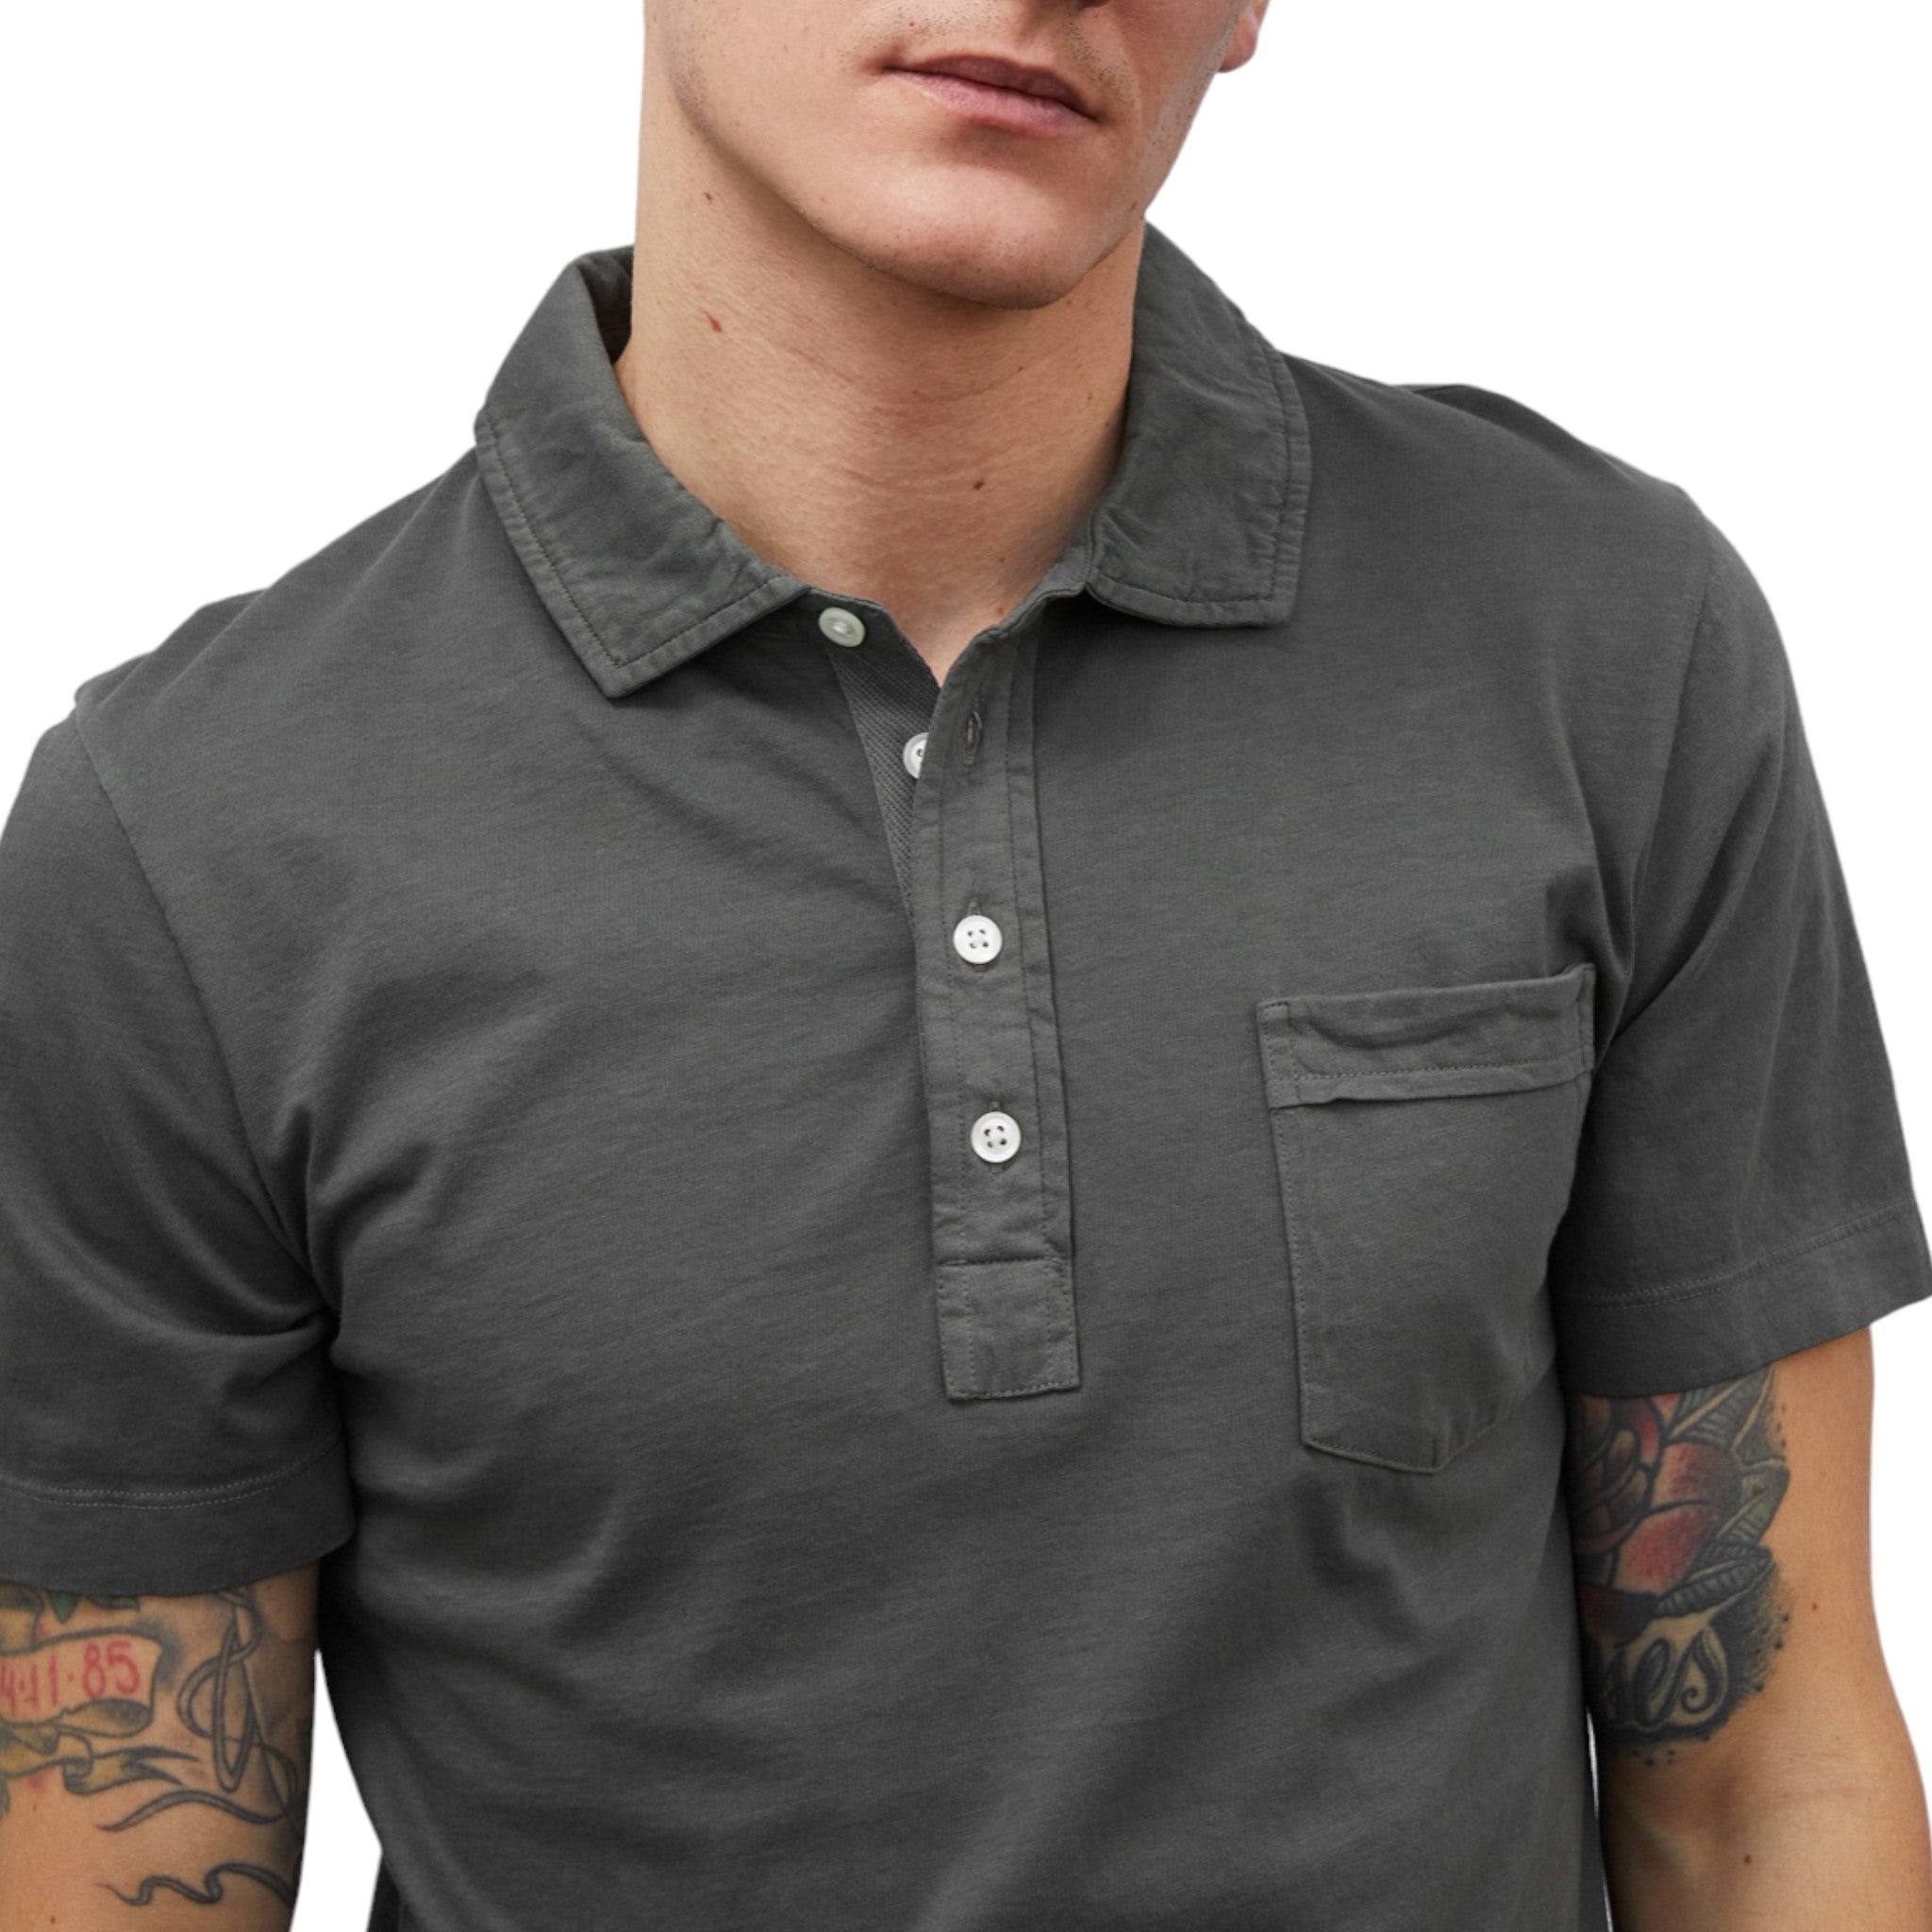 Short sleeve grey polo with four buttons